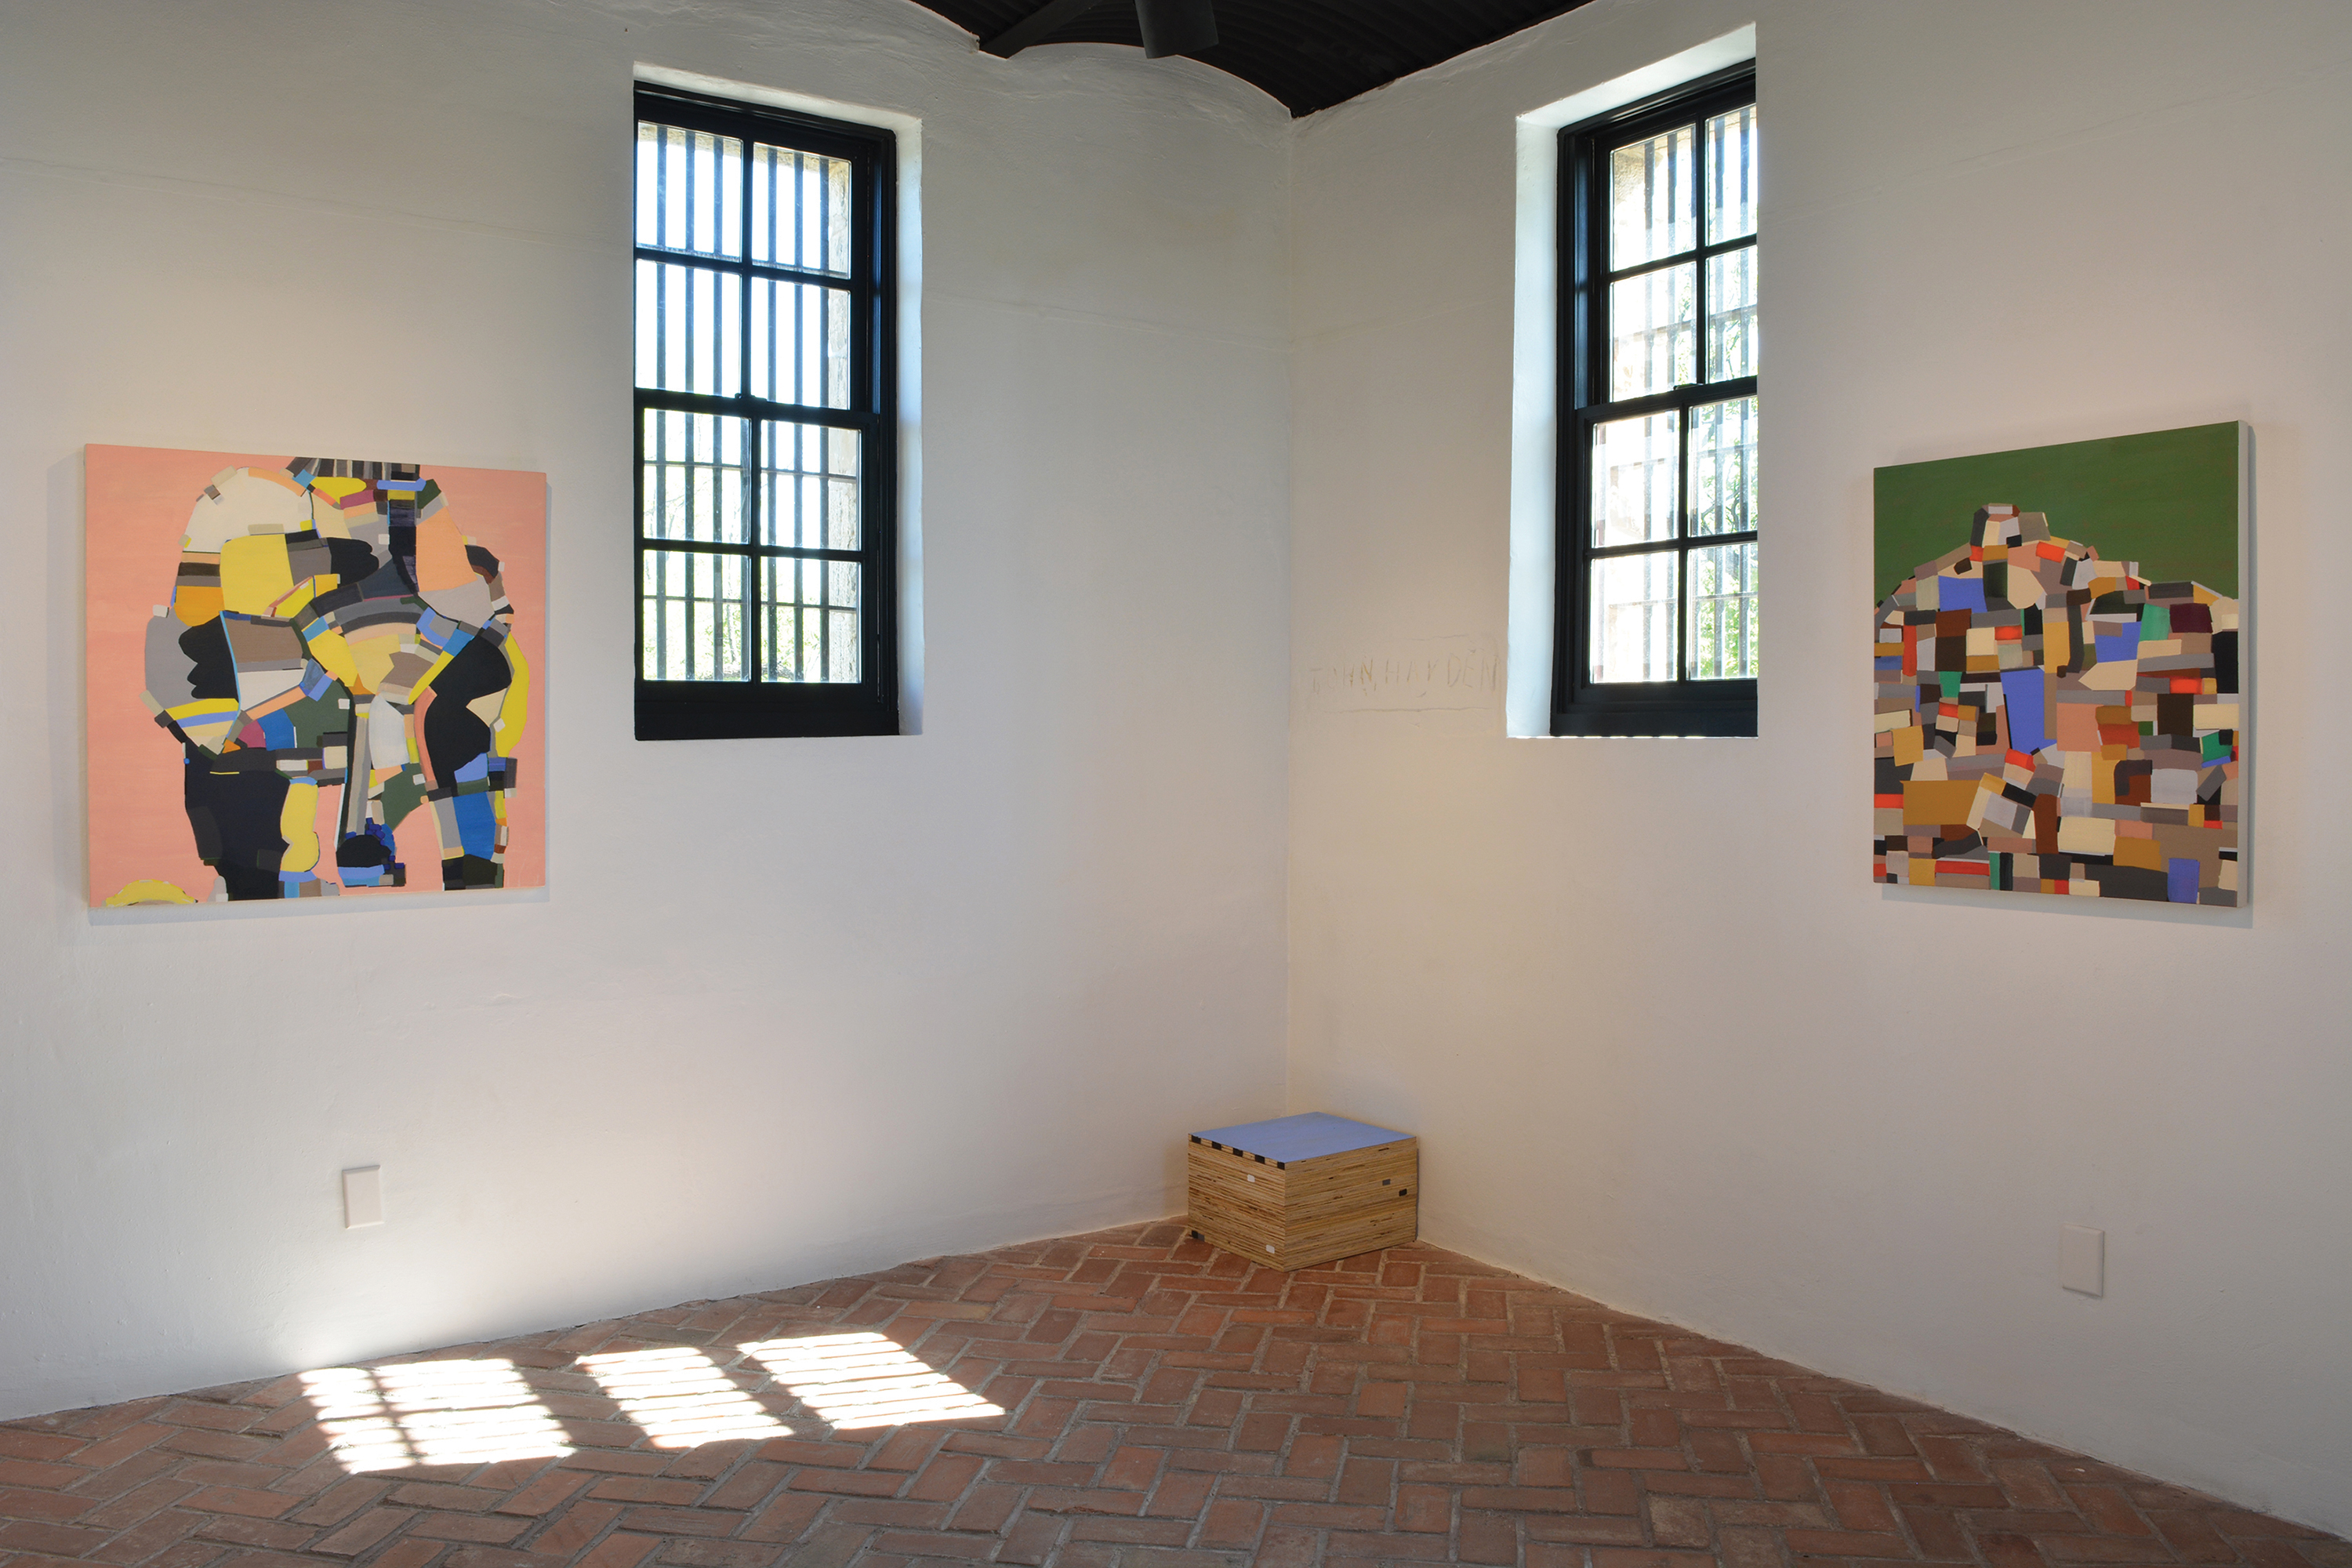 Painter Matthew Bourbon's exhibit Waiting for Now was part of the museum's Cell Series this year.